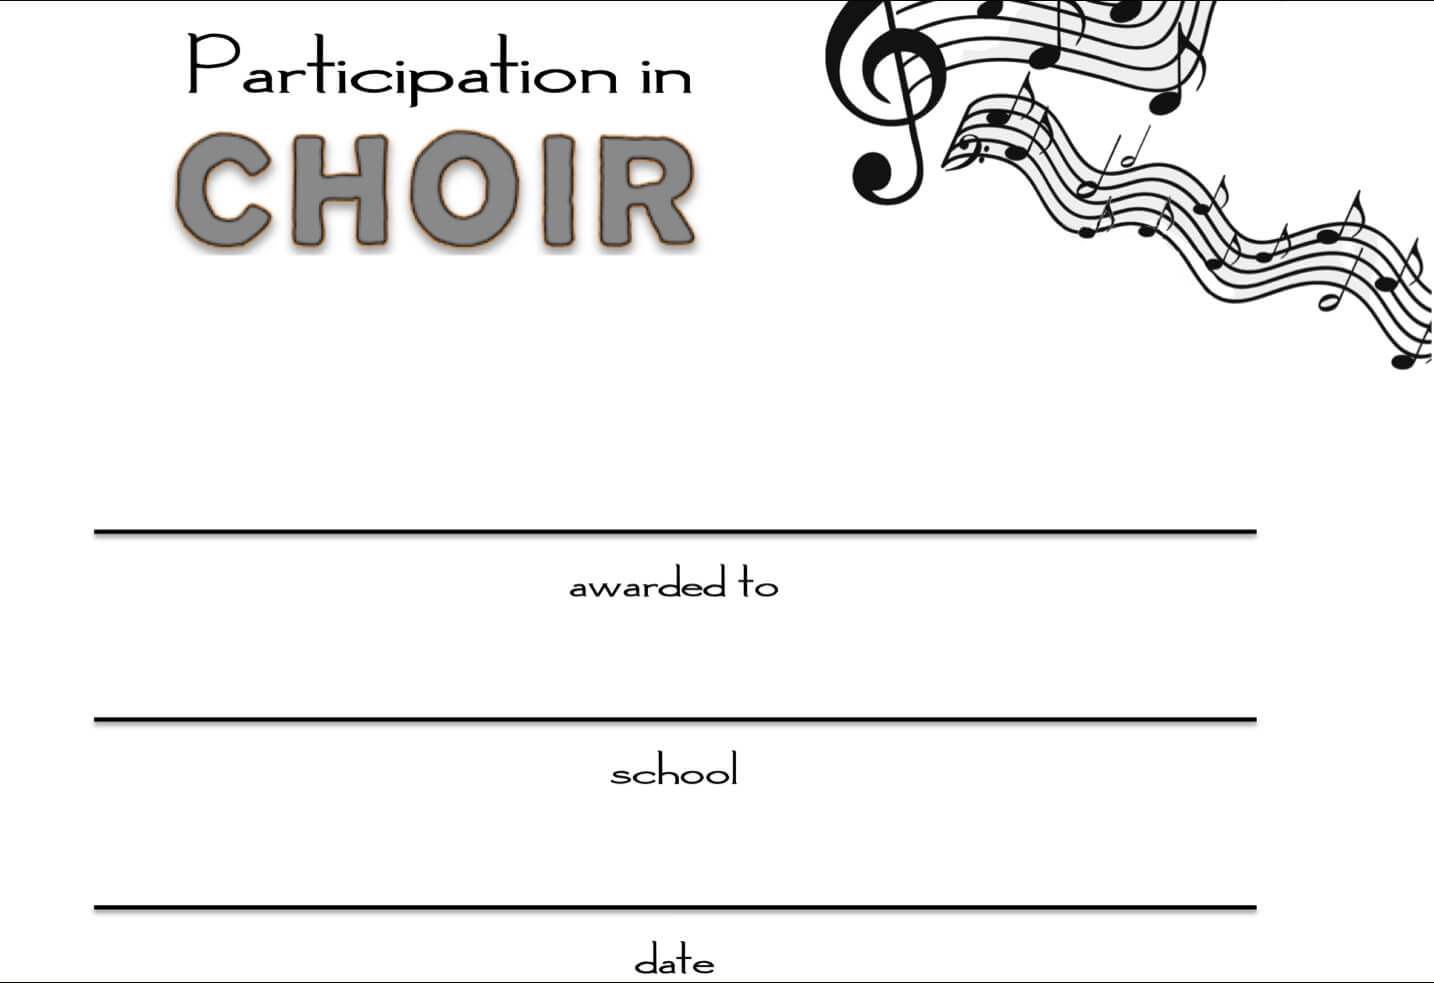 8+ Free Choir Certificate Of Participation Templates - Pdf Within Choir Certificate Template